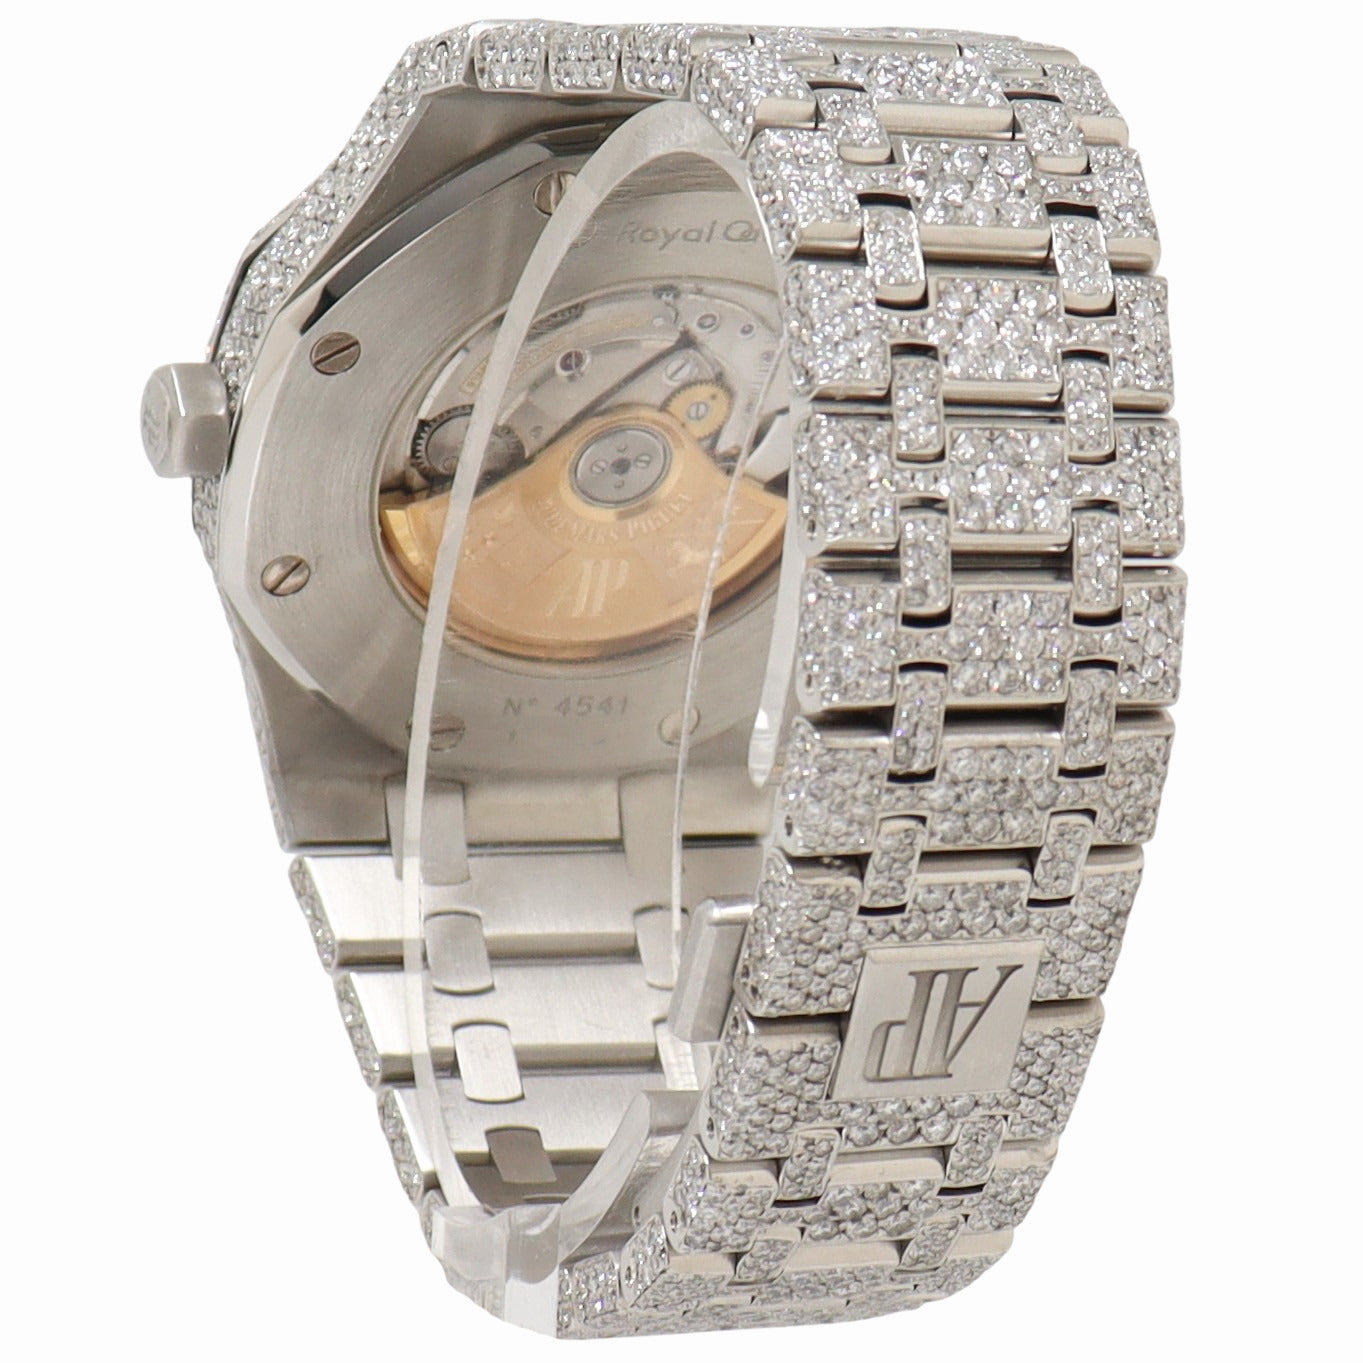 Load image into Gallery viewer, Audemars Piguet Royal Oak 41mm ICED OUT Stainless Steel Pave Diamond Dial Watch - Happy Jewelers Fine Jewelry Lifetime Warranty
